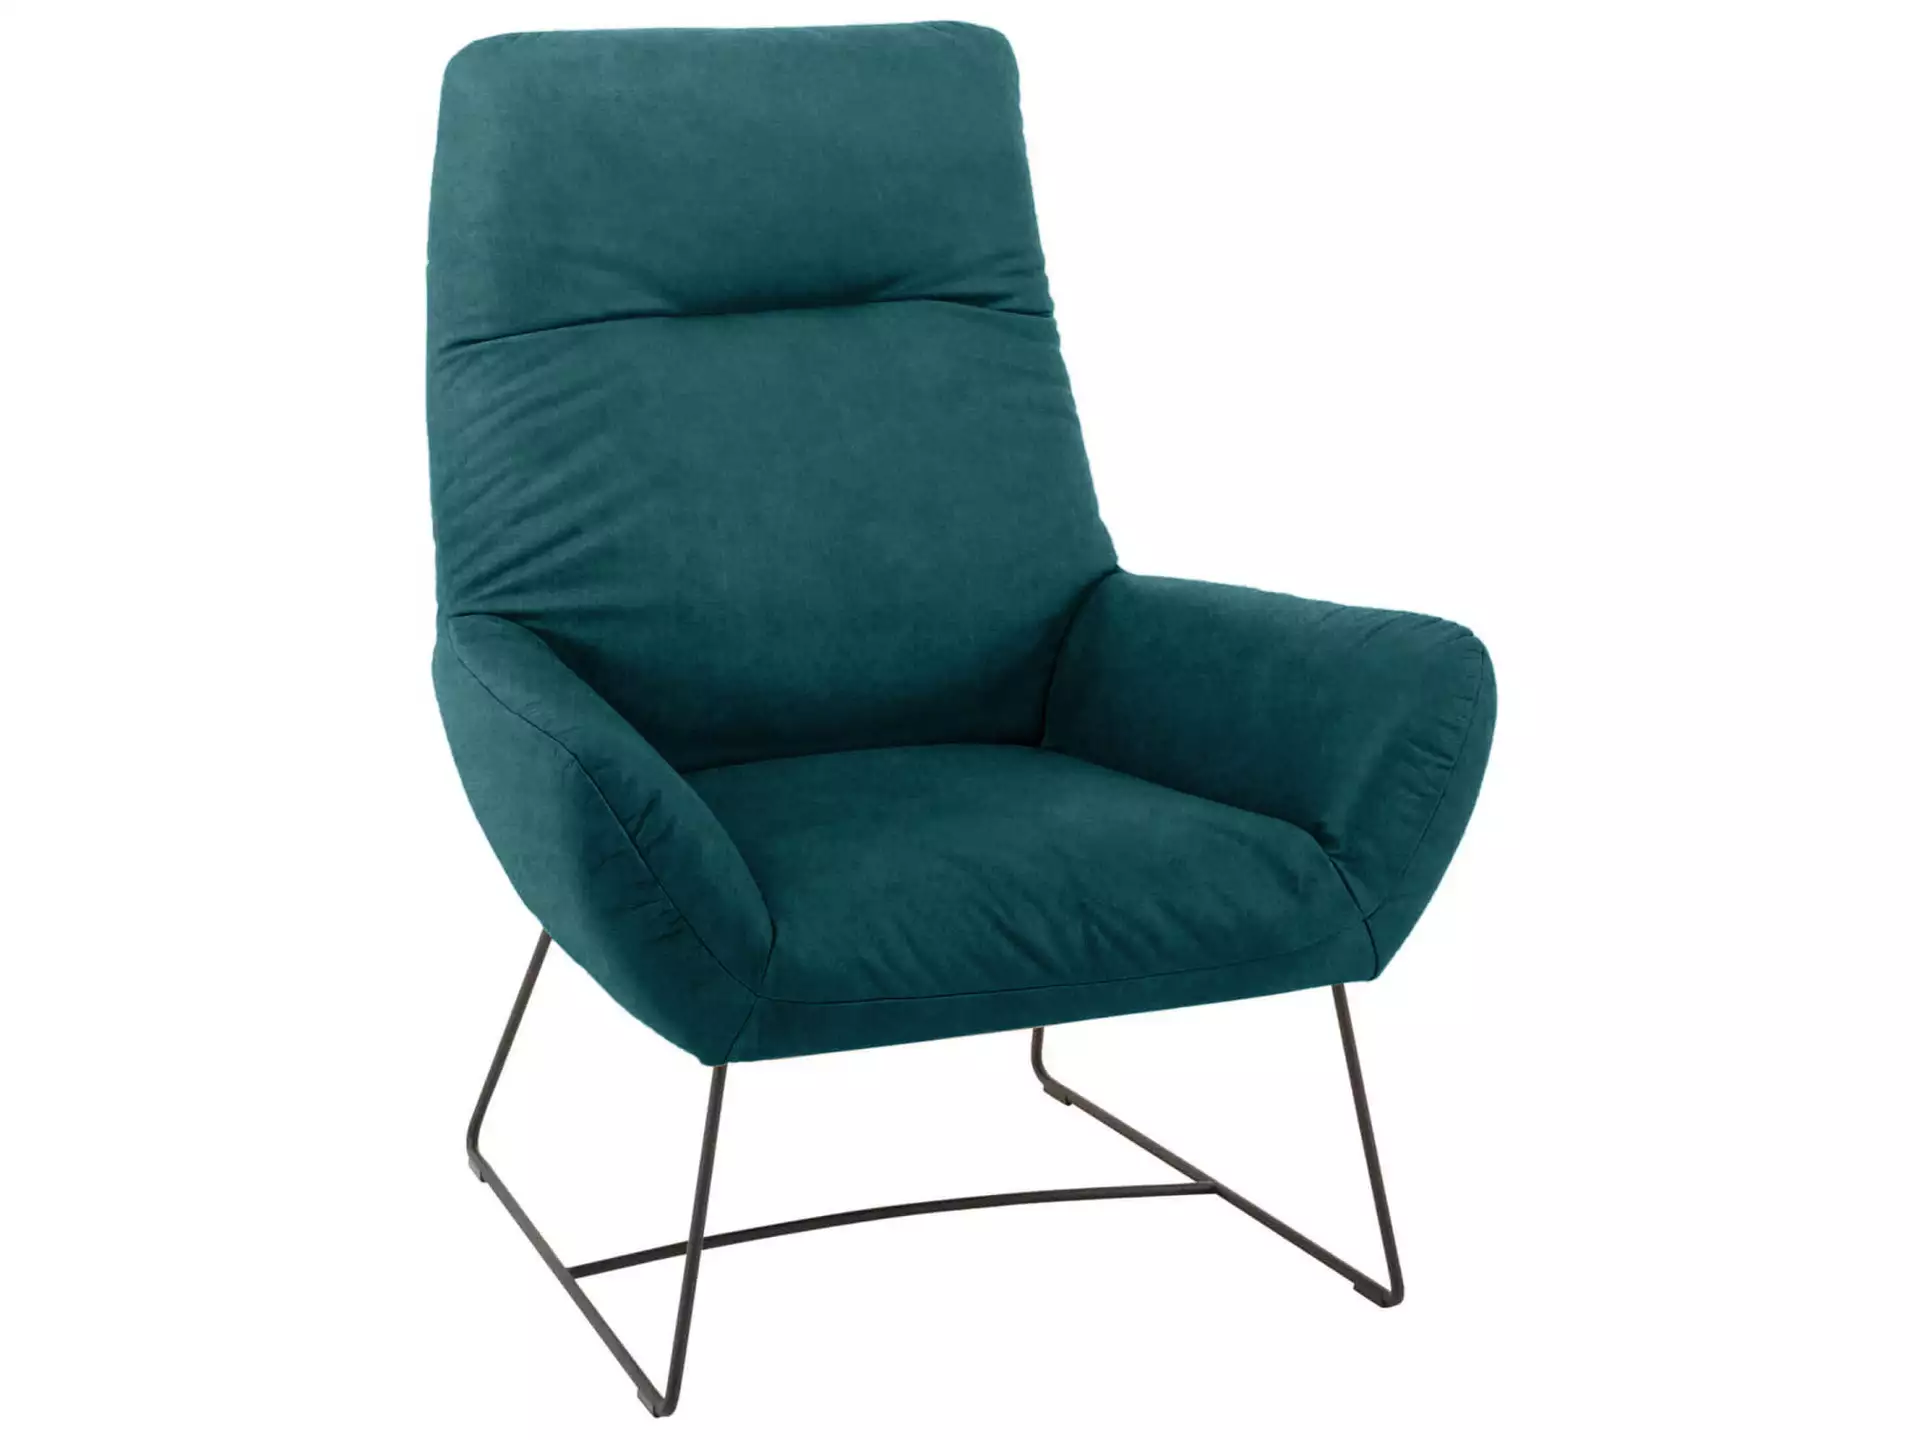 Sessel Berlin Basic Candy / Farbe: Petrol / Material: Stoff Basic